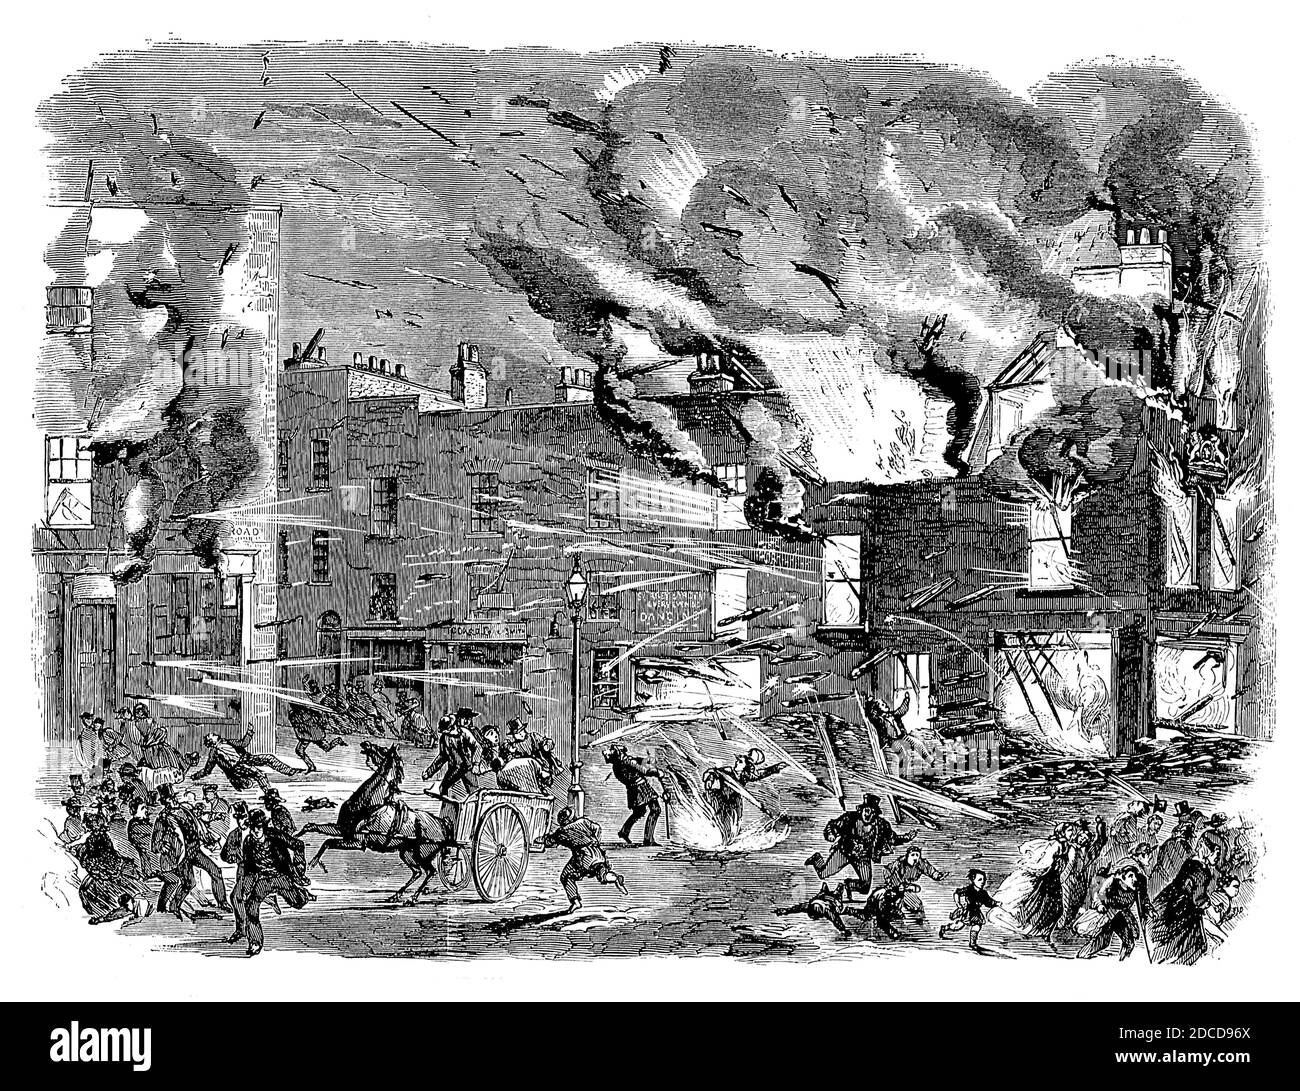 Fireworks Factory Explosion, 1858 Stock Photo